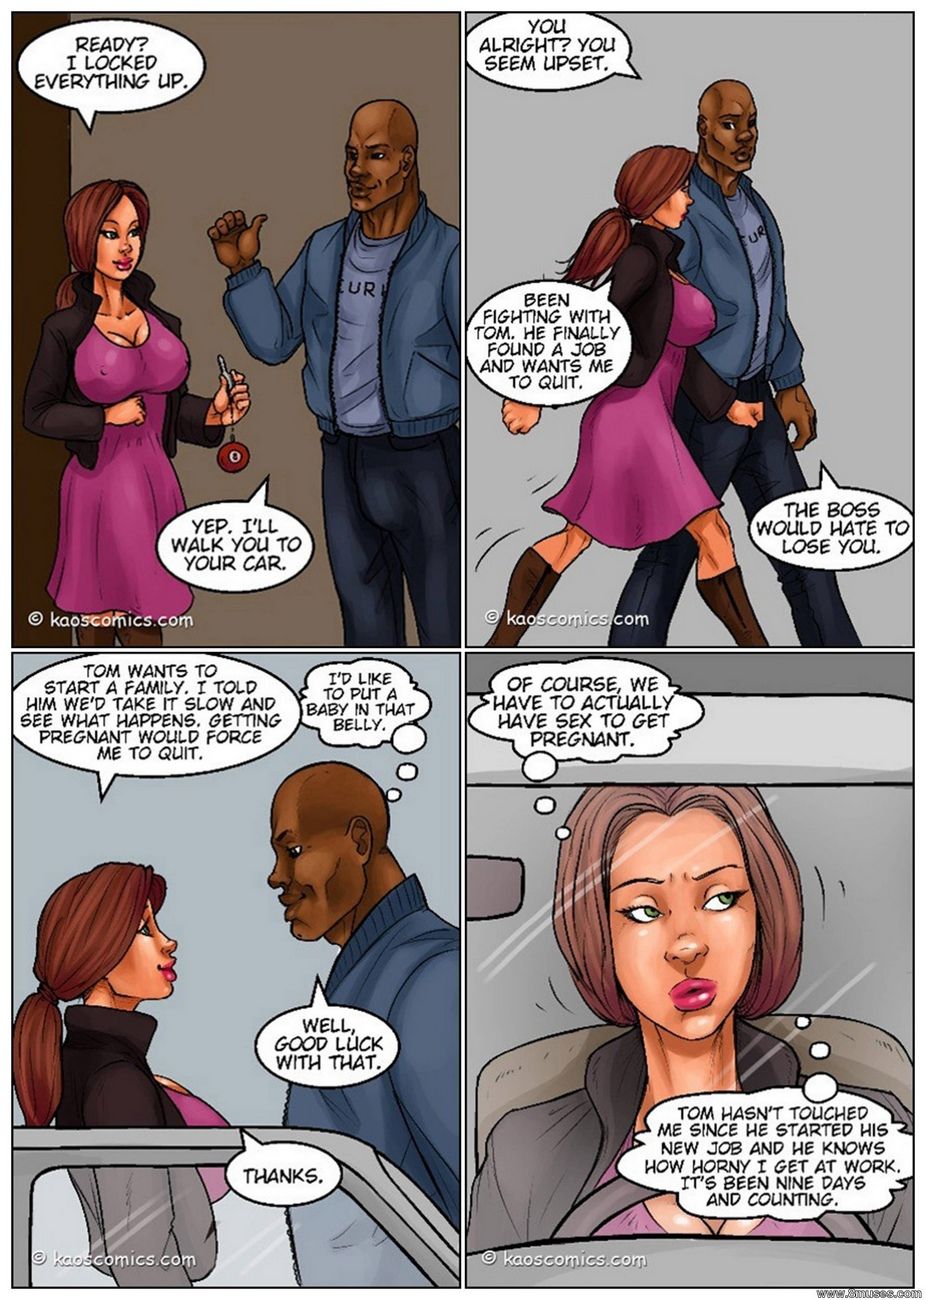 Recession Blues - Wife Forced To Strip - part 2 page 1